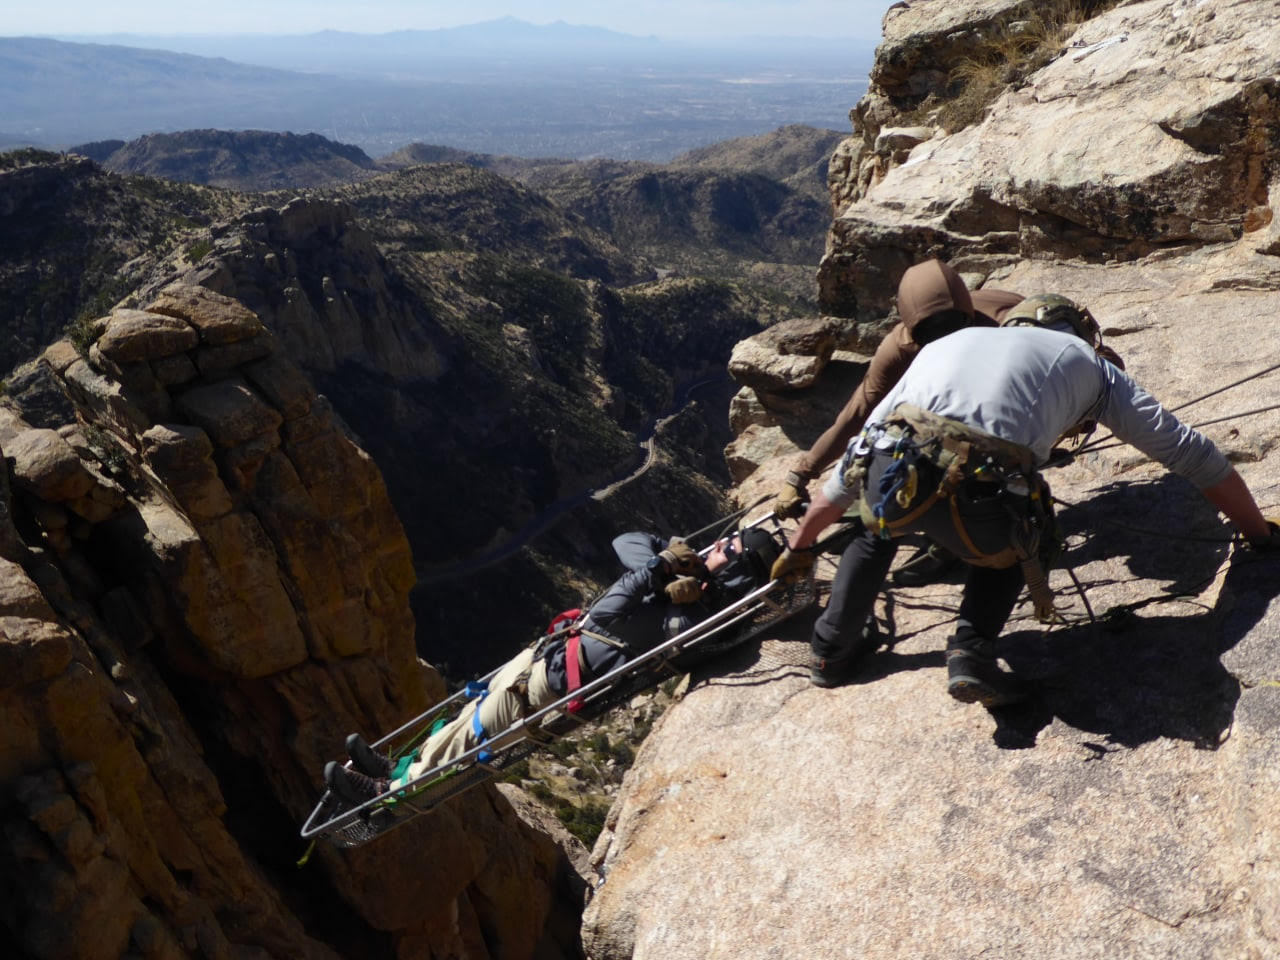 Small Team Technical Rope Rescue – The Peak, Inc.